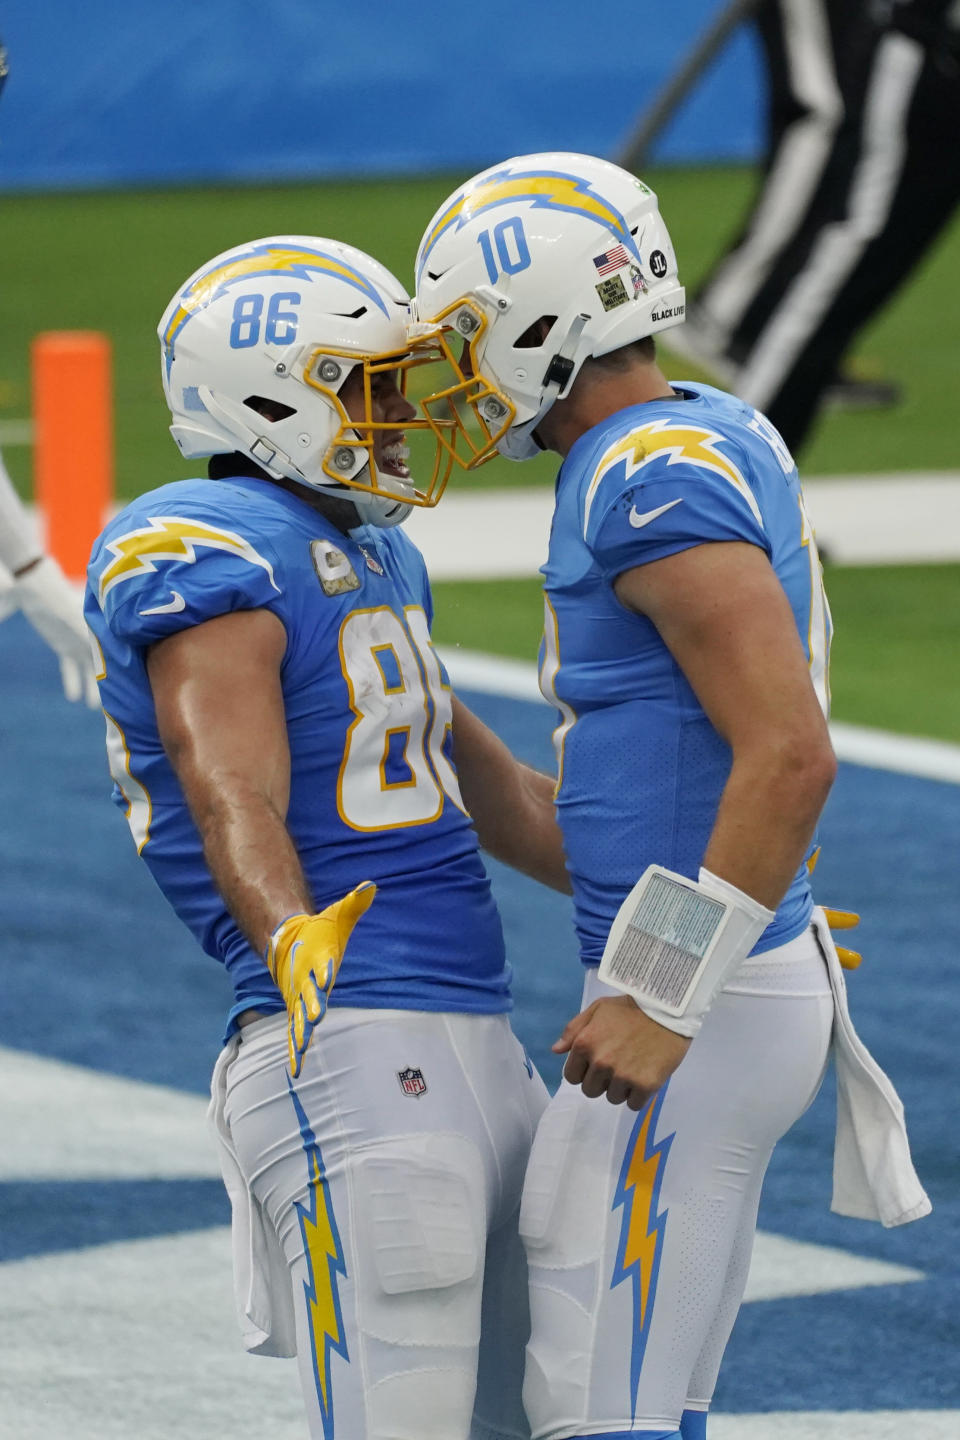 Los Angeles Chargers tight end Hunter Henry, left, celebrates his touchdown catch with Justin Herbert (10) during the first half of an NFL football game against the New York Jets Sunday, Nov. 22, 2020, in Inglewood, Calif. (AP Photo/Jae C. Hong)